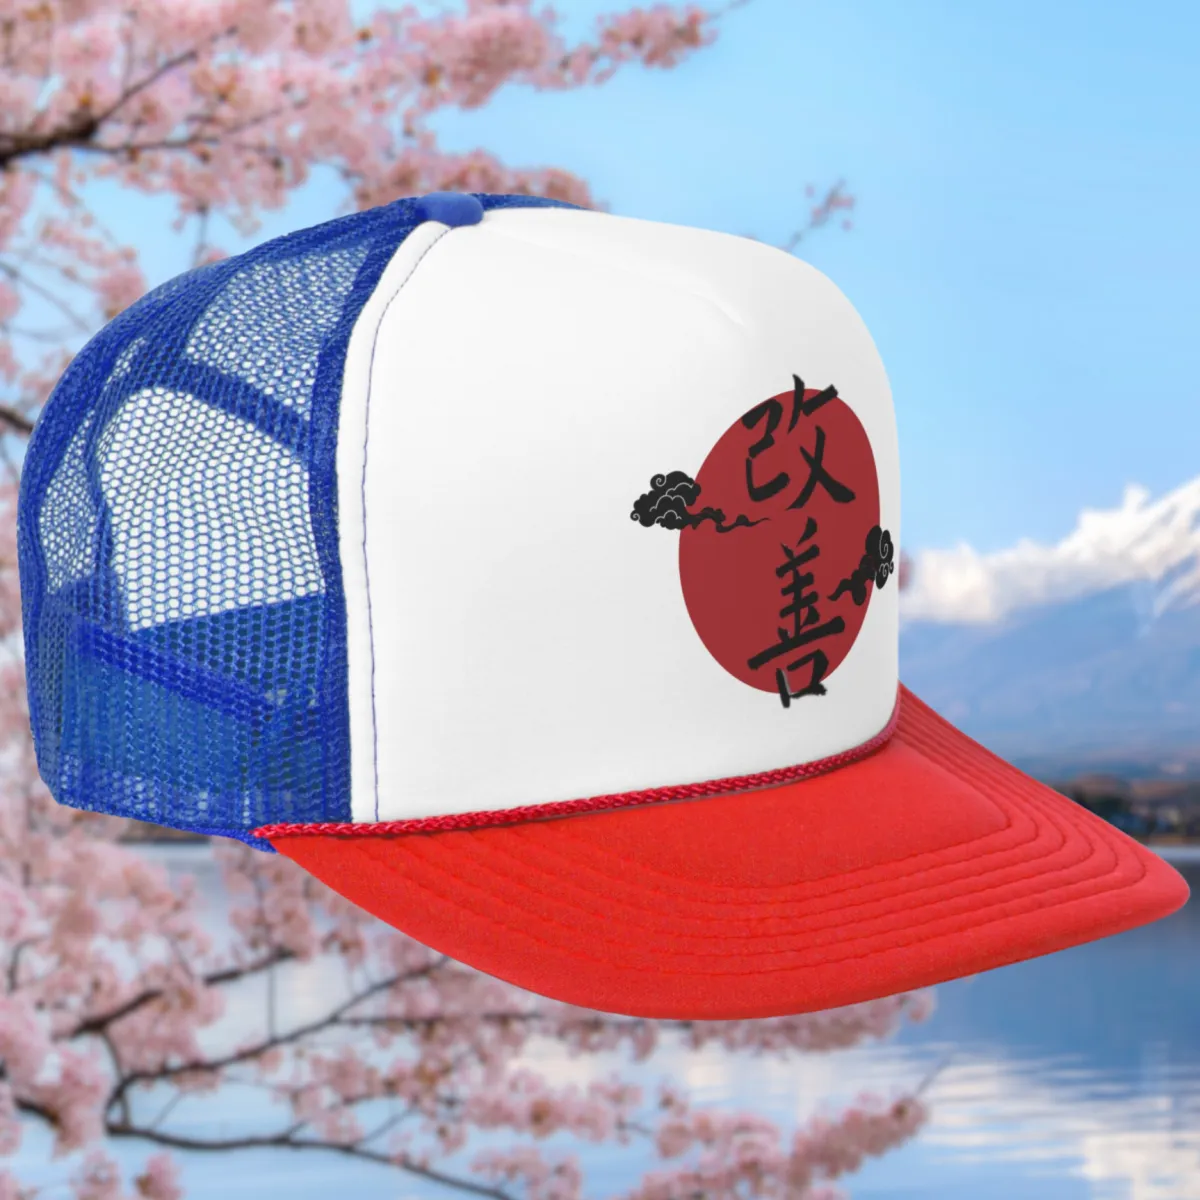 Sacred Gains hat on a red bill, blue mesh, white front panel trucker cap